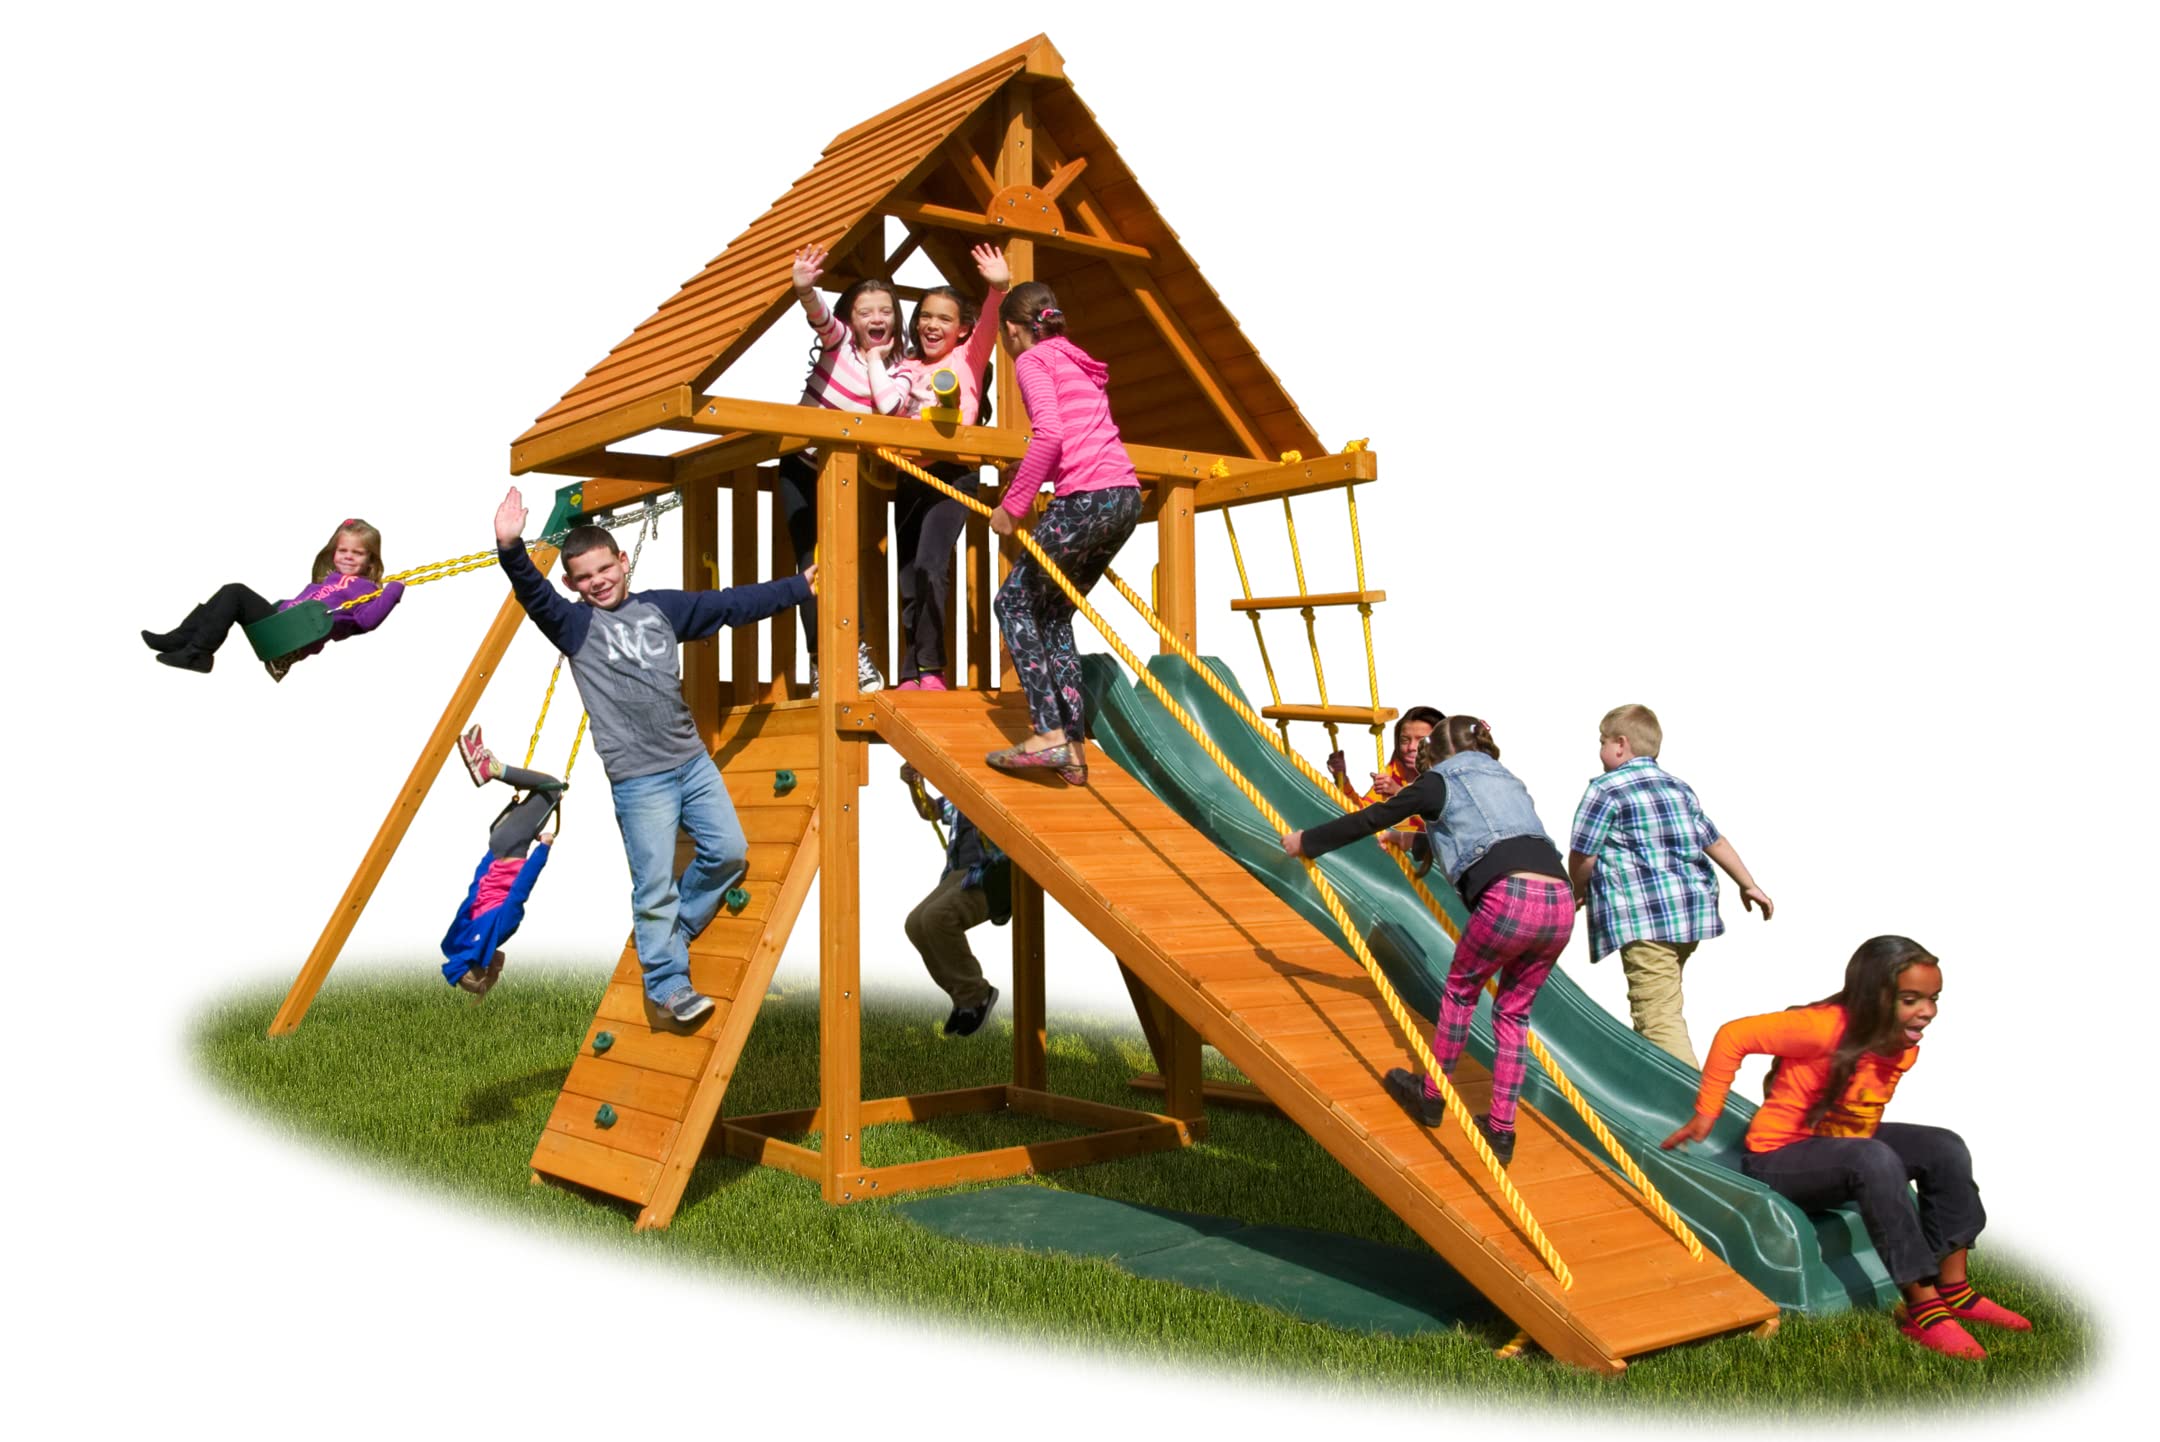 Dreamscape Solid Cedar Wood Swing Set | Jungle Gym with Clubhouse, Rock Wall, Wave Slide, Wood Roof, Gang Plank, Swings & Accessories | Easy Assembly | Kids Playhouse (#3)